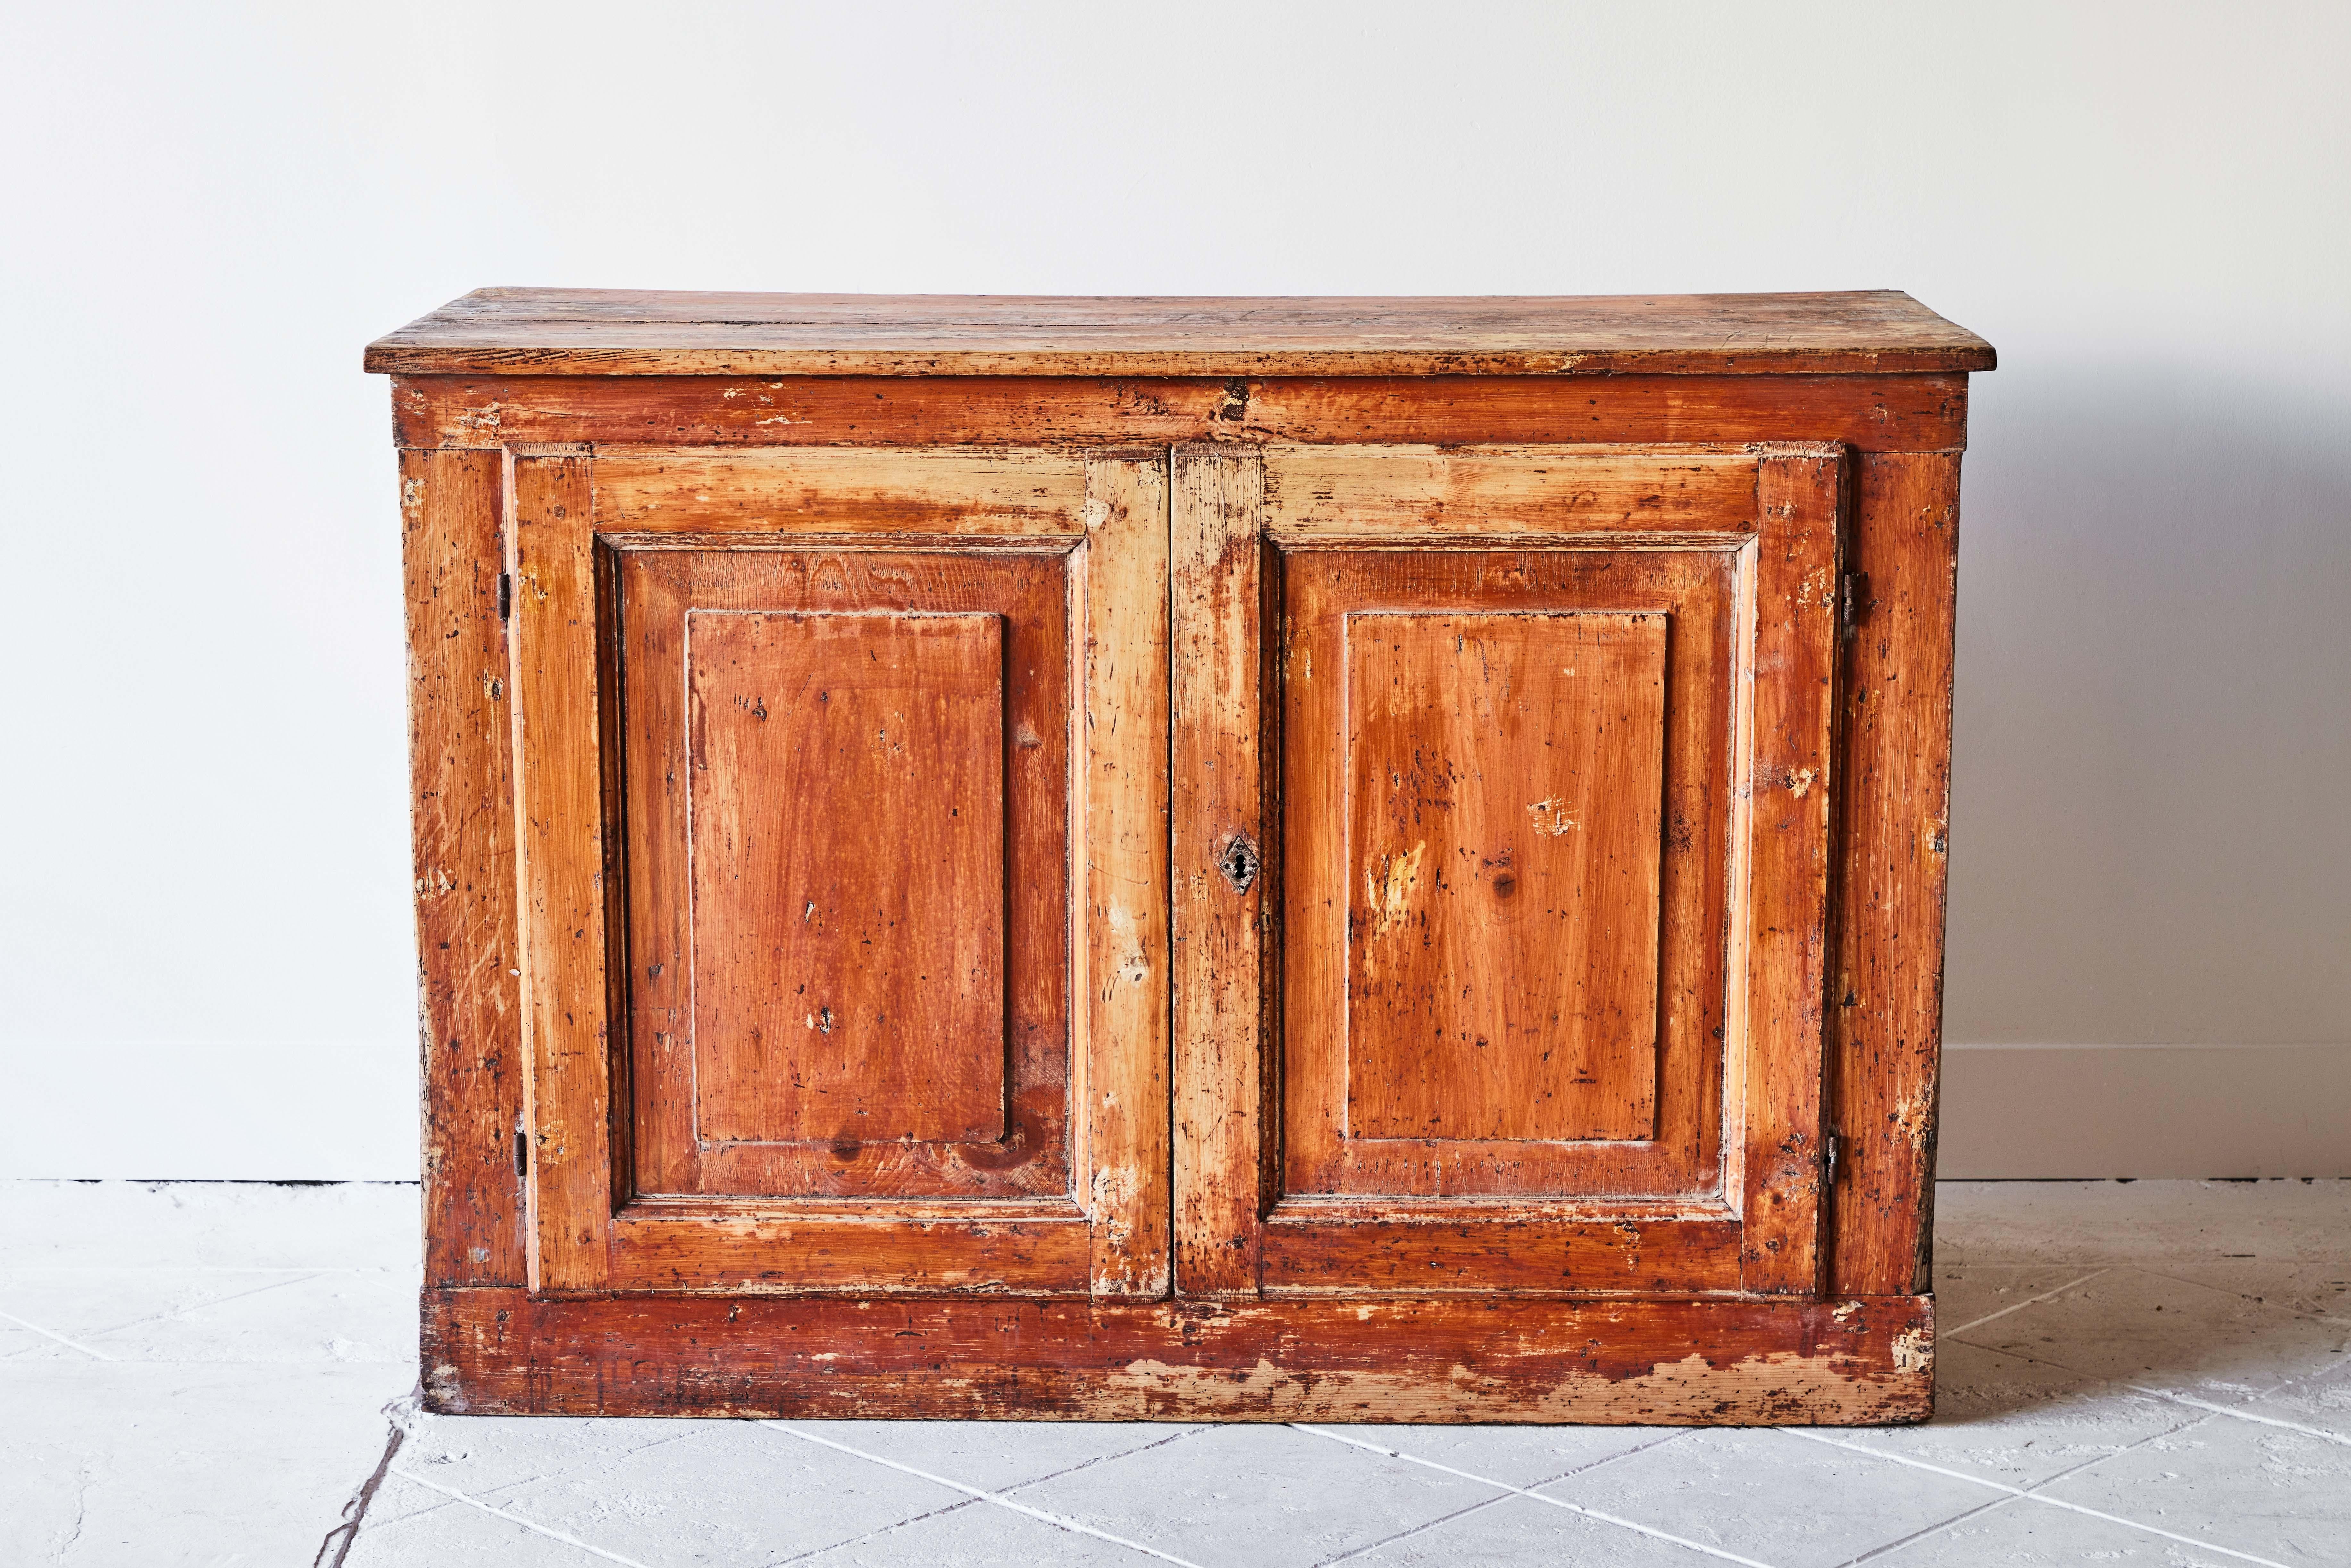 Rustic French country sideboard cabinet in a vibrant burnt orange. Inside is large and roomy with two shelves. Perfect cabinet or cupboard for any room.